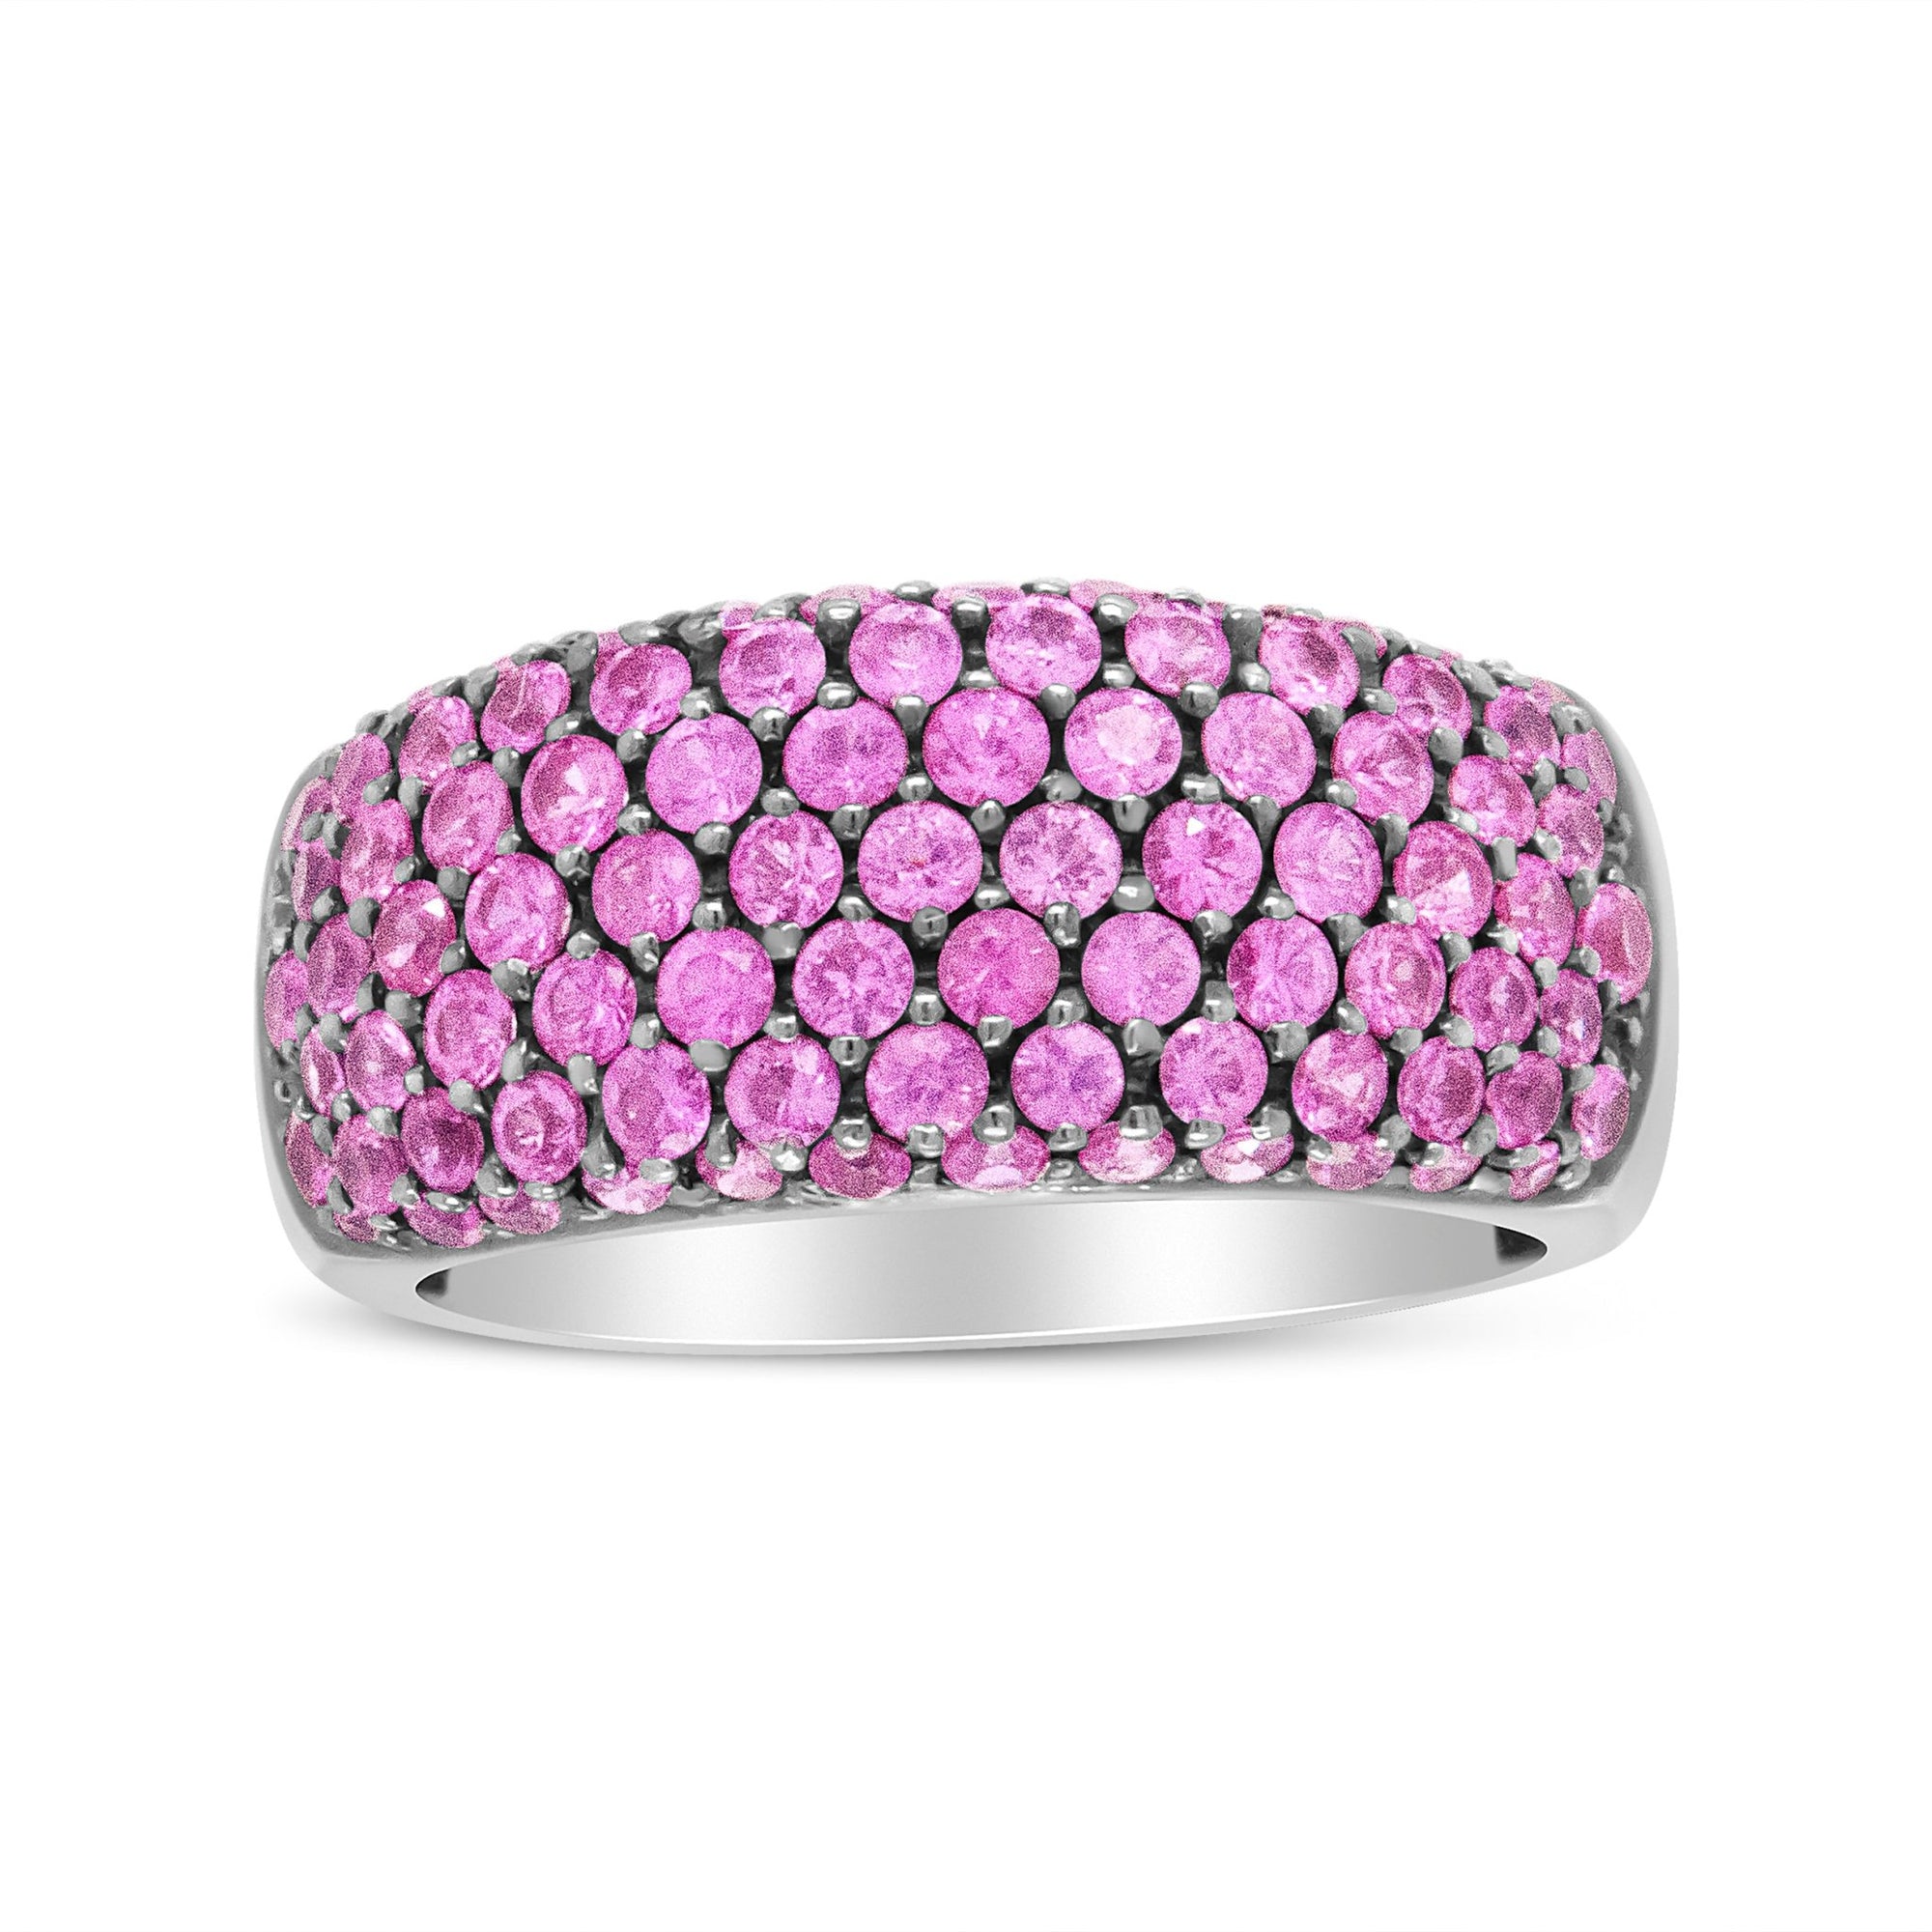 18K White Gold and Black Rhodium Multi Row Pink Sapphire Classic Band Ring - Ring Size 6.5 - LinkagejewelrydesignLinkagejewelrydesign